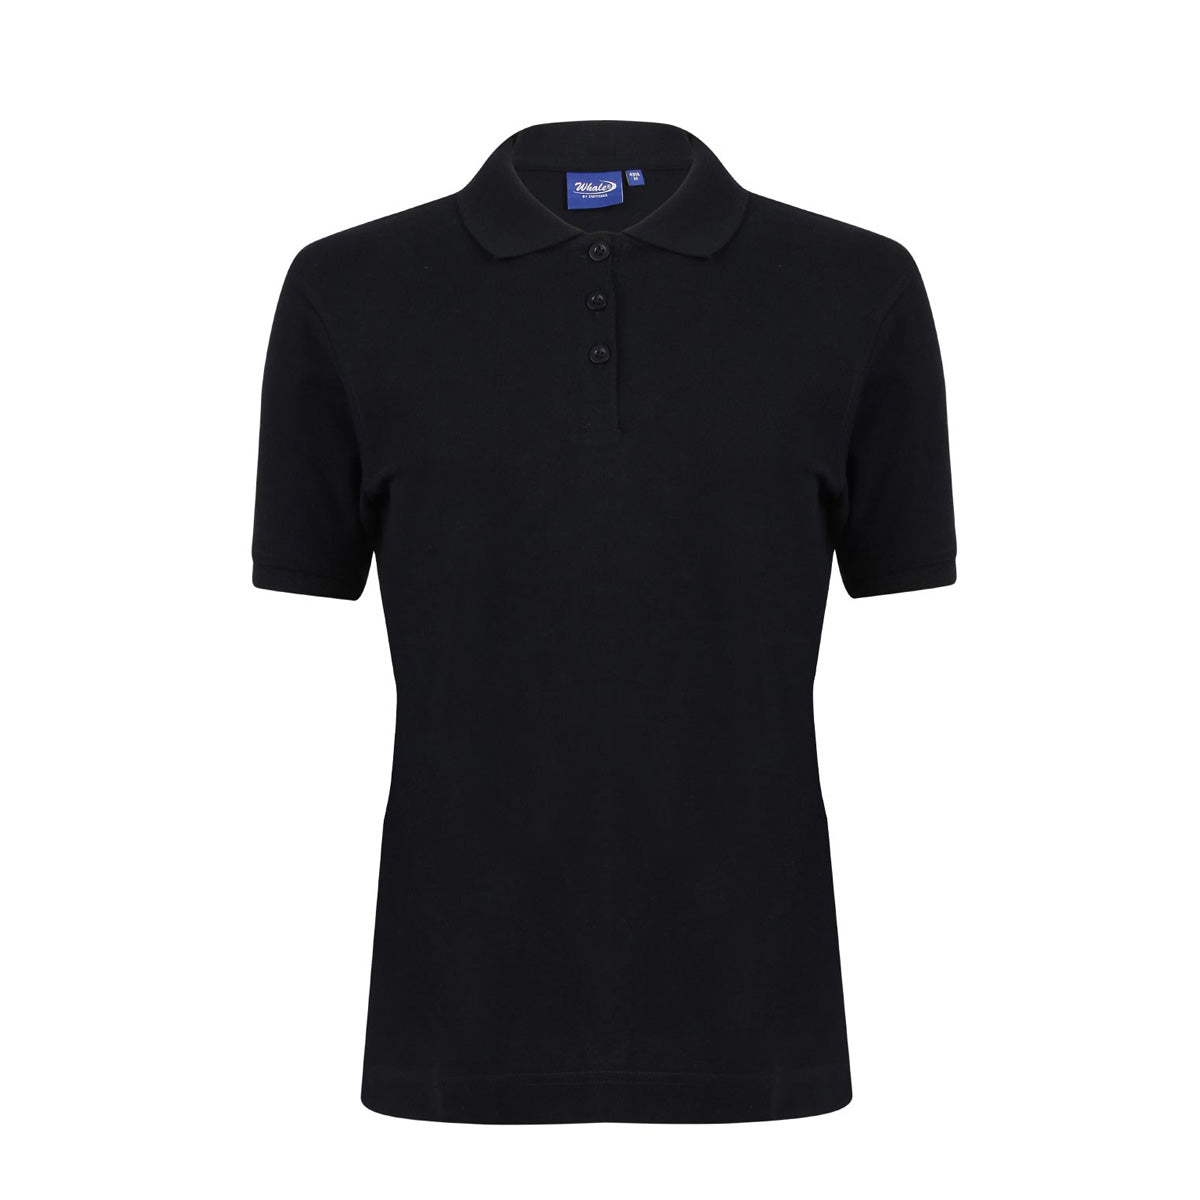 polo, polo shirt, polo store, ralphlauren, polo t shirts, golf polo, golf shirts, golf t shirt, polo shirt ladies, work outfit, outfits, black polo